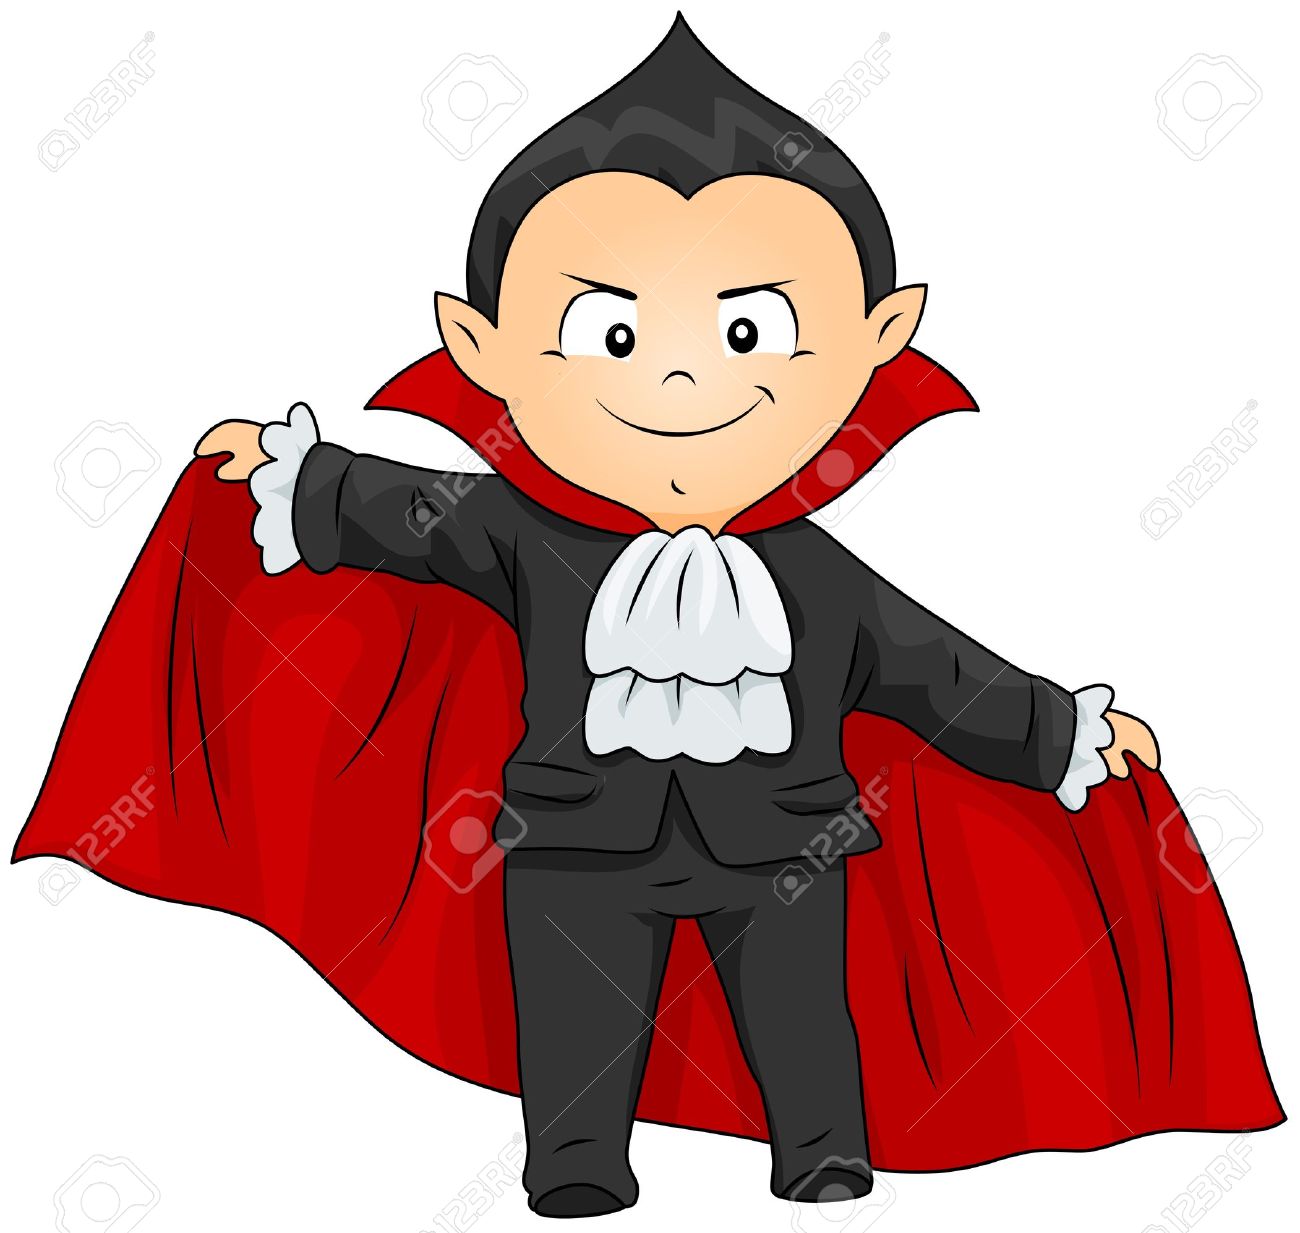 Dracula clipart vampire cape. Girl free download best